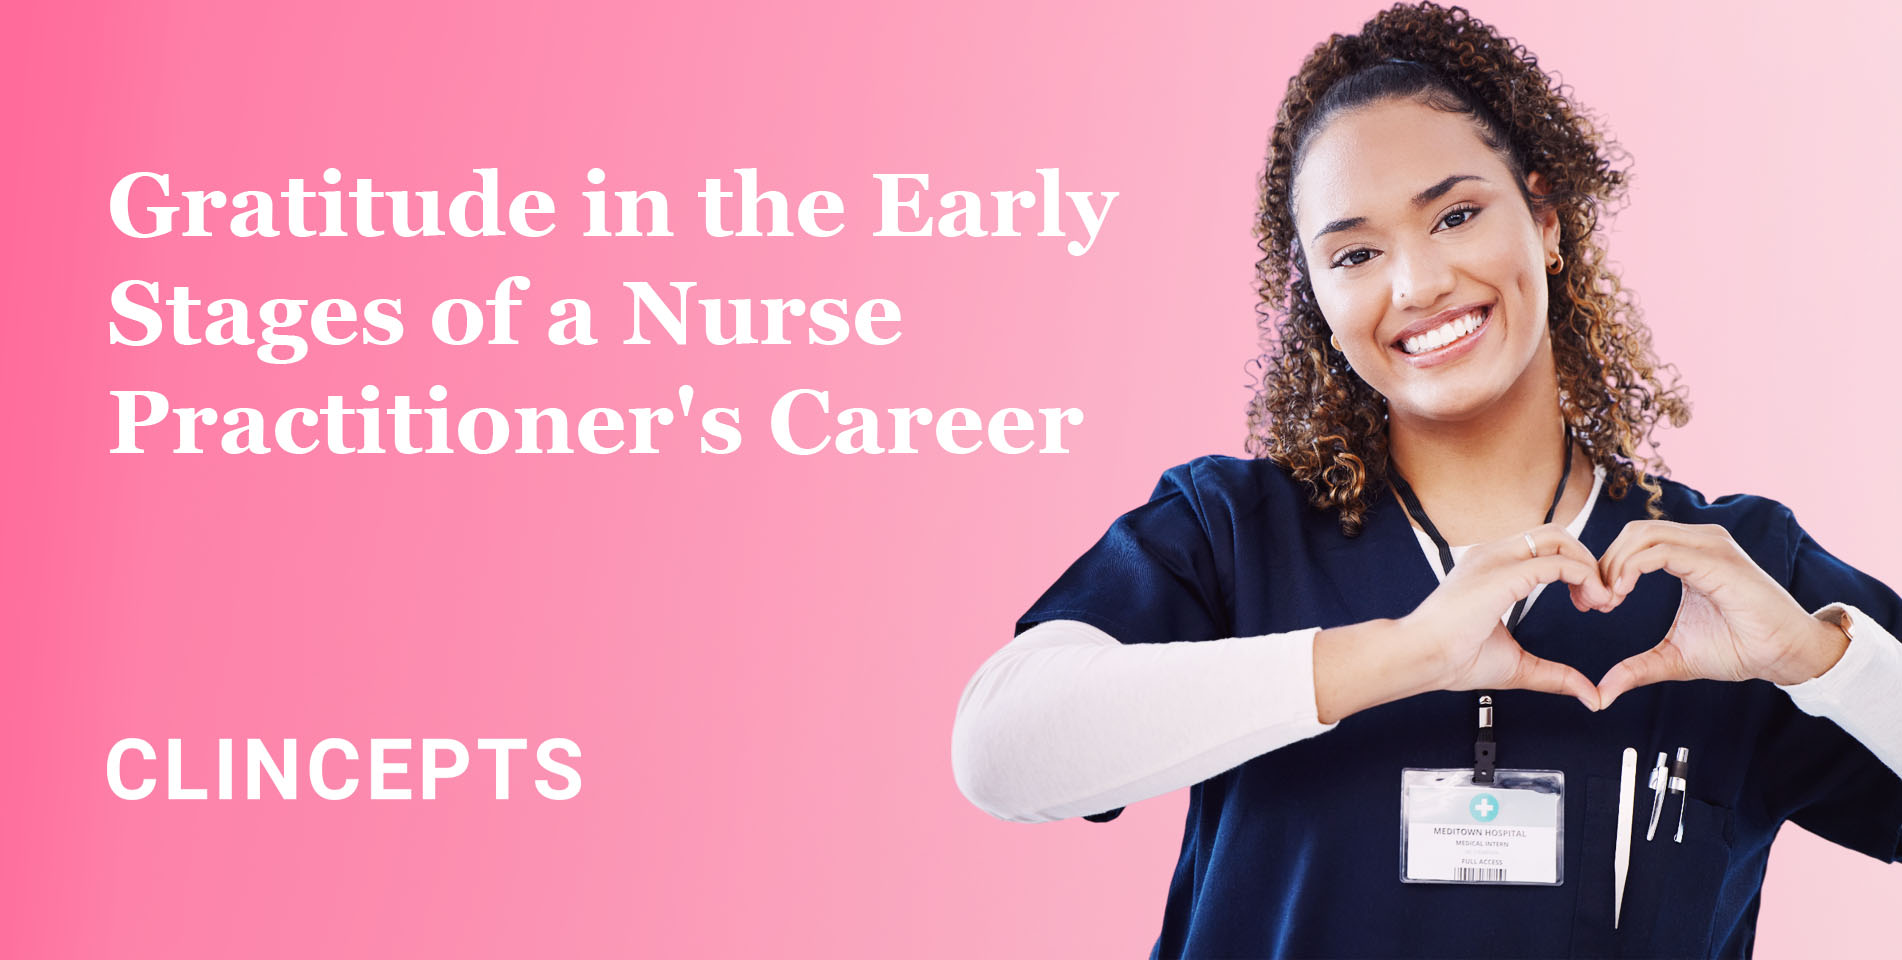 Gratitude in the Early Stages of a Nurse Practitioner's Career